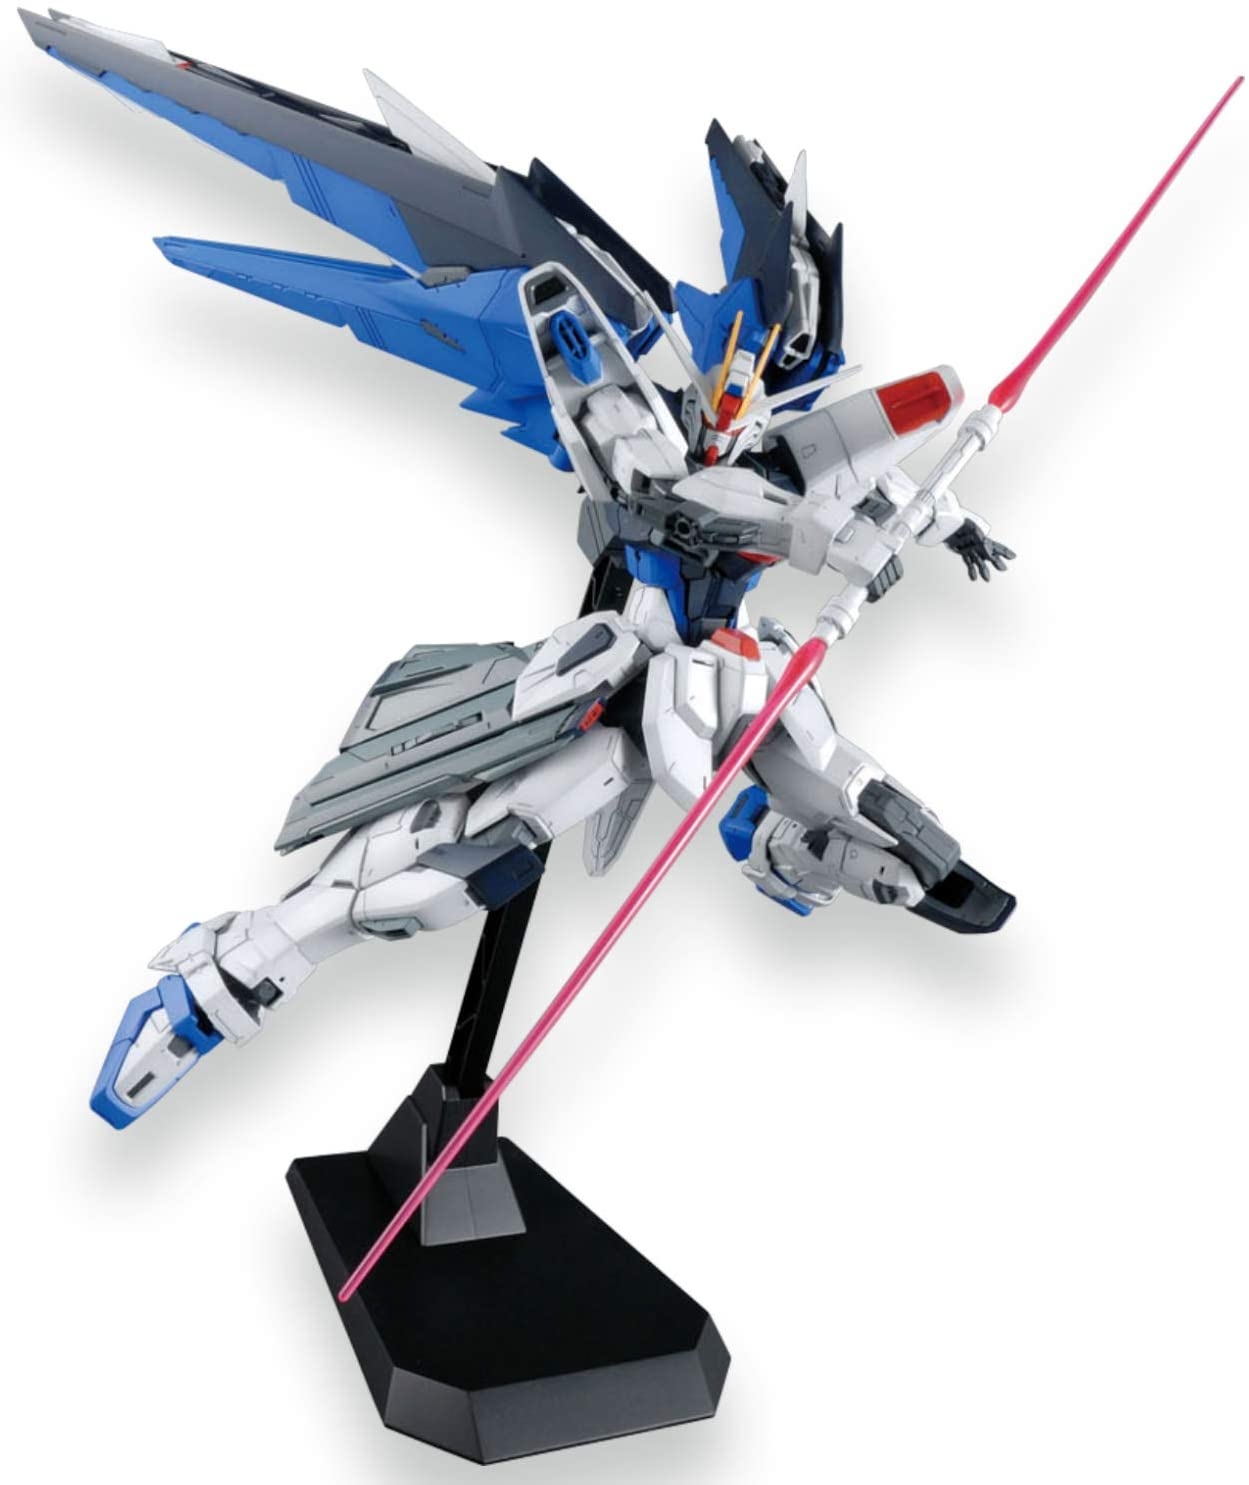 Bandai MG 1/100 Mobile Suit Freedom Gundam Seed Ver.2.0 BAN204883 Plastic Model for sale online 